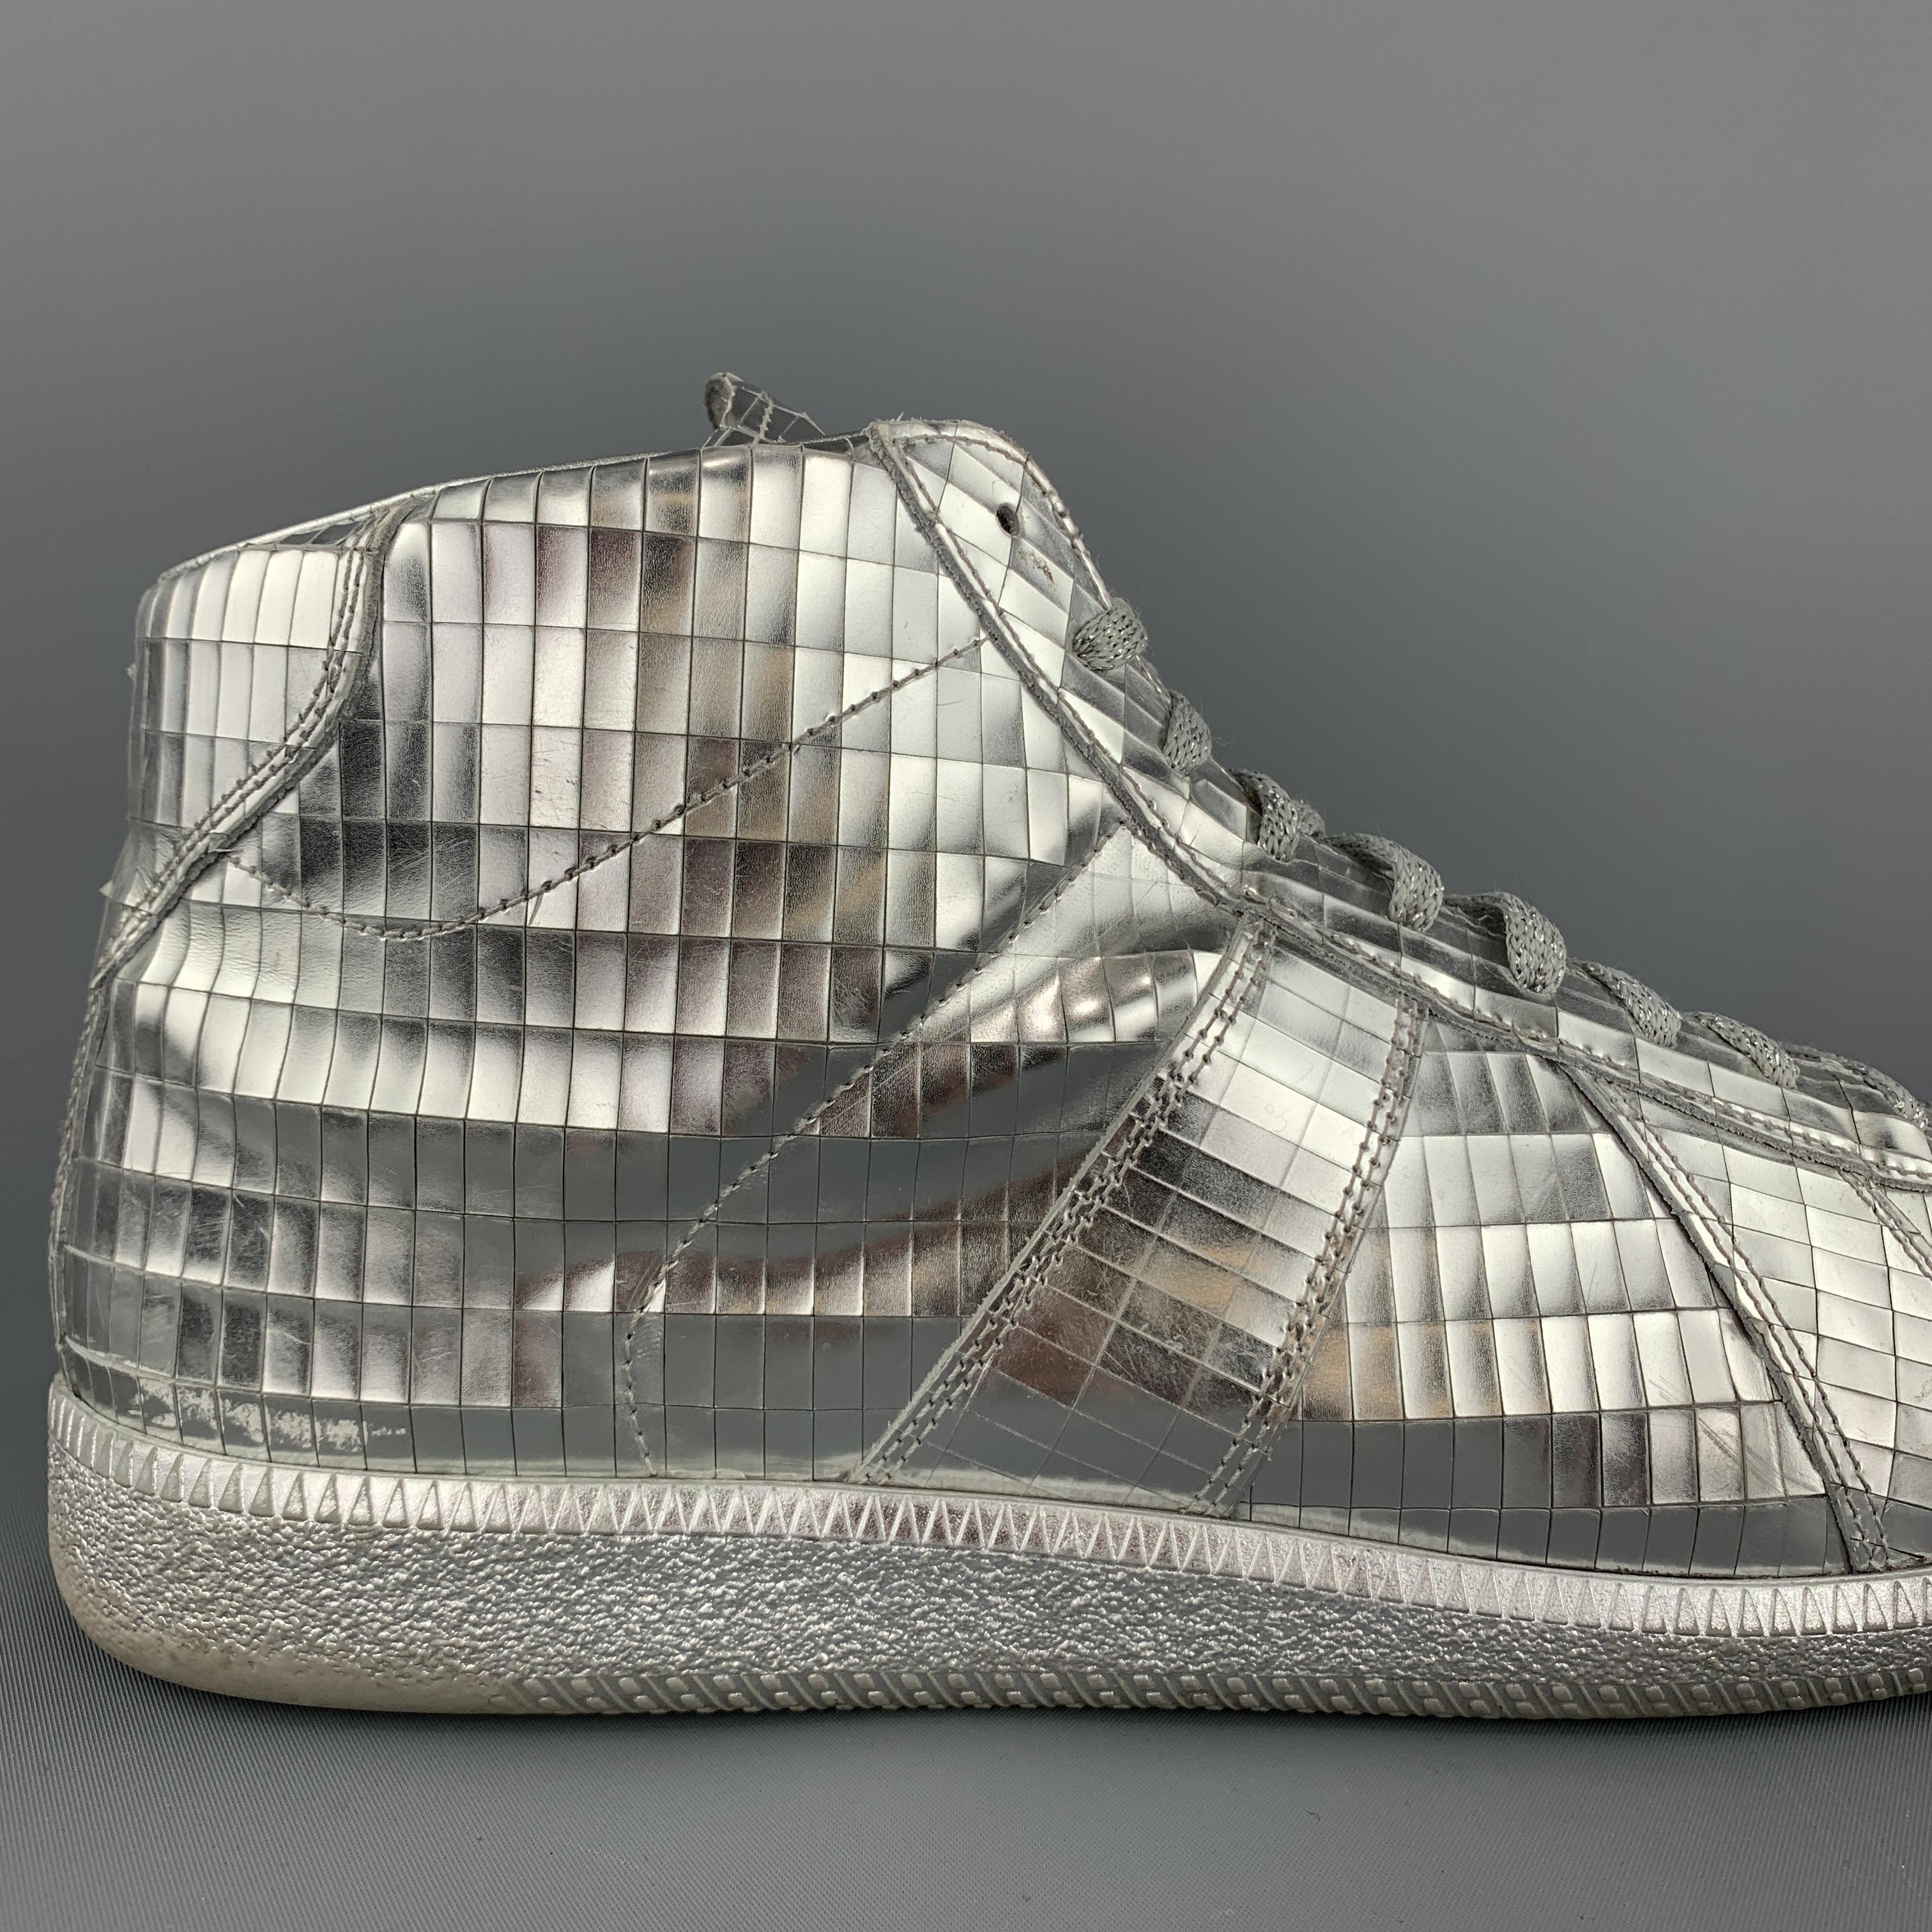 MAISON MARGIELA high top sneakers come in metallic silver Disco Ball textured leather with metallic rubber sole. Wear throughout. As-is. Made in Italy.

Fair Pre-Owned Condition.
Marked: IT 43

Outsole: 11.65 X 4 in.